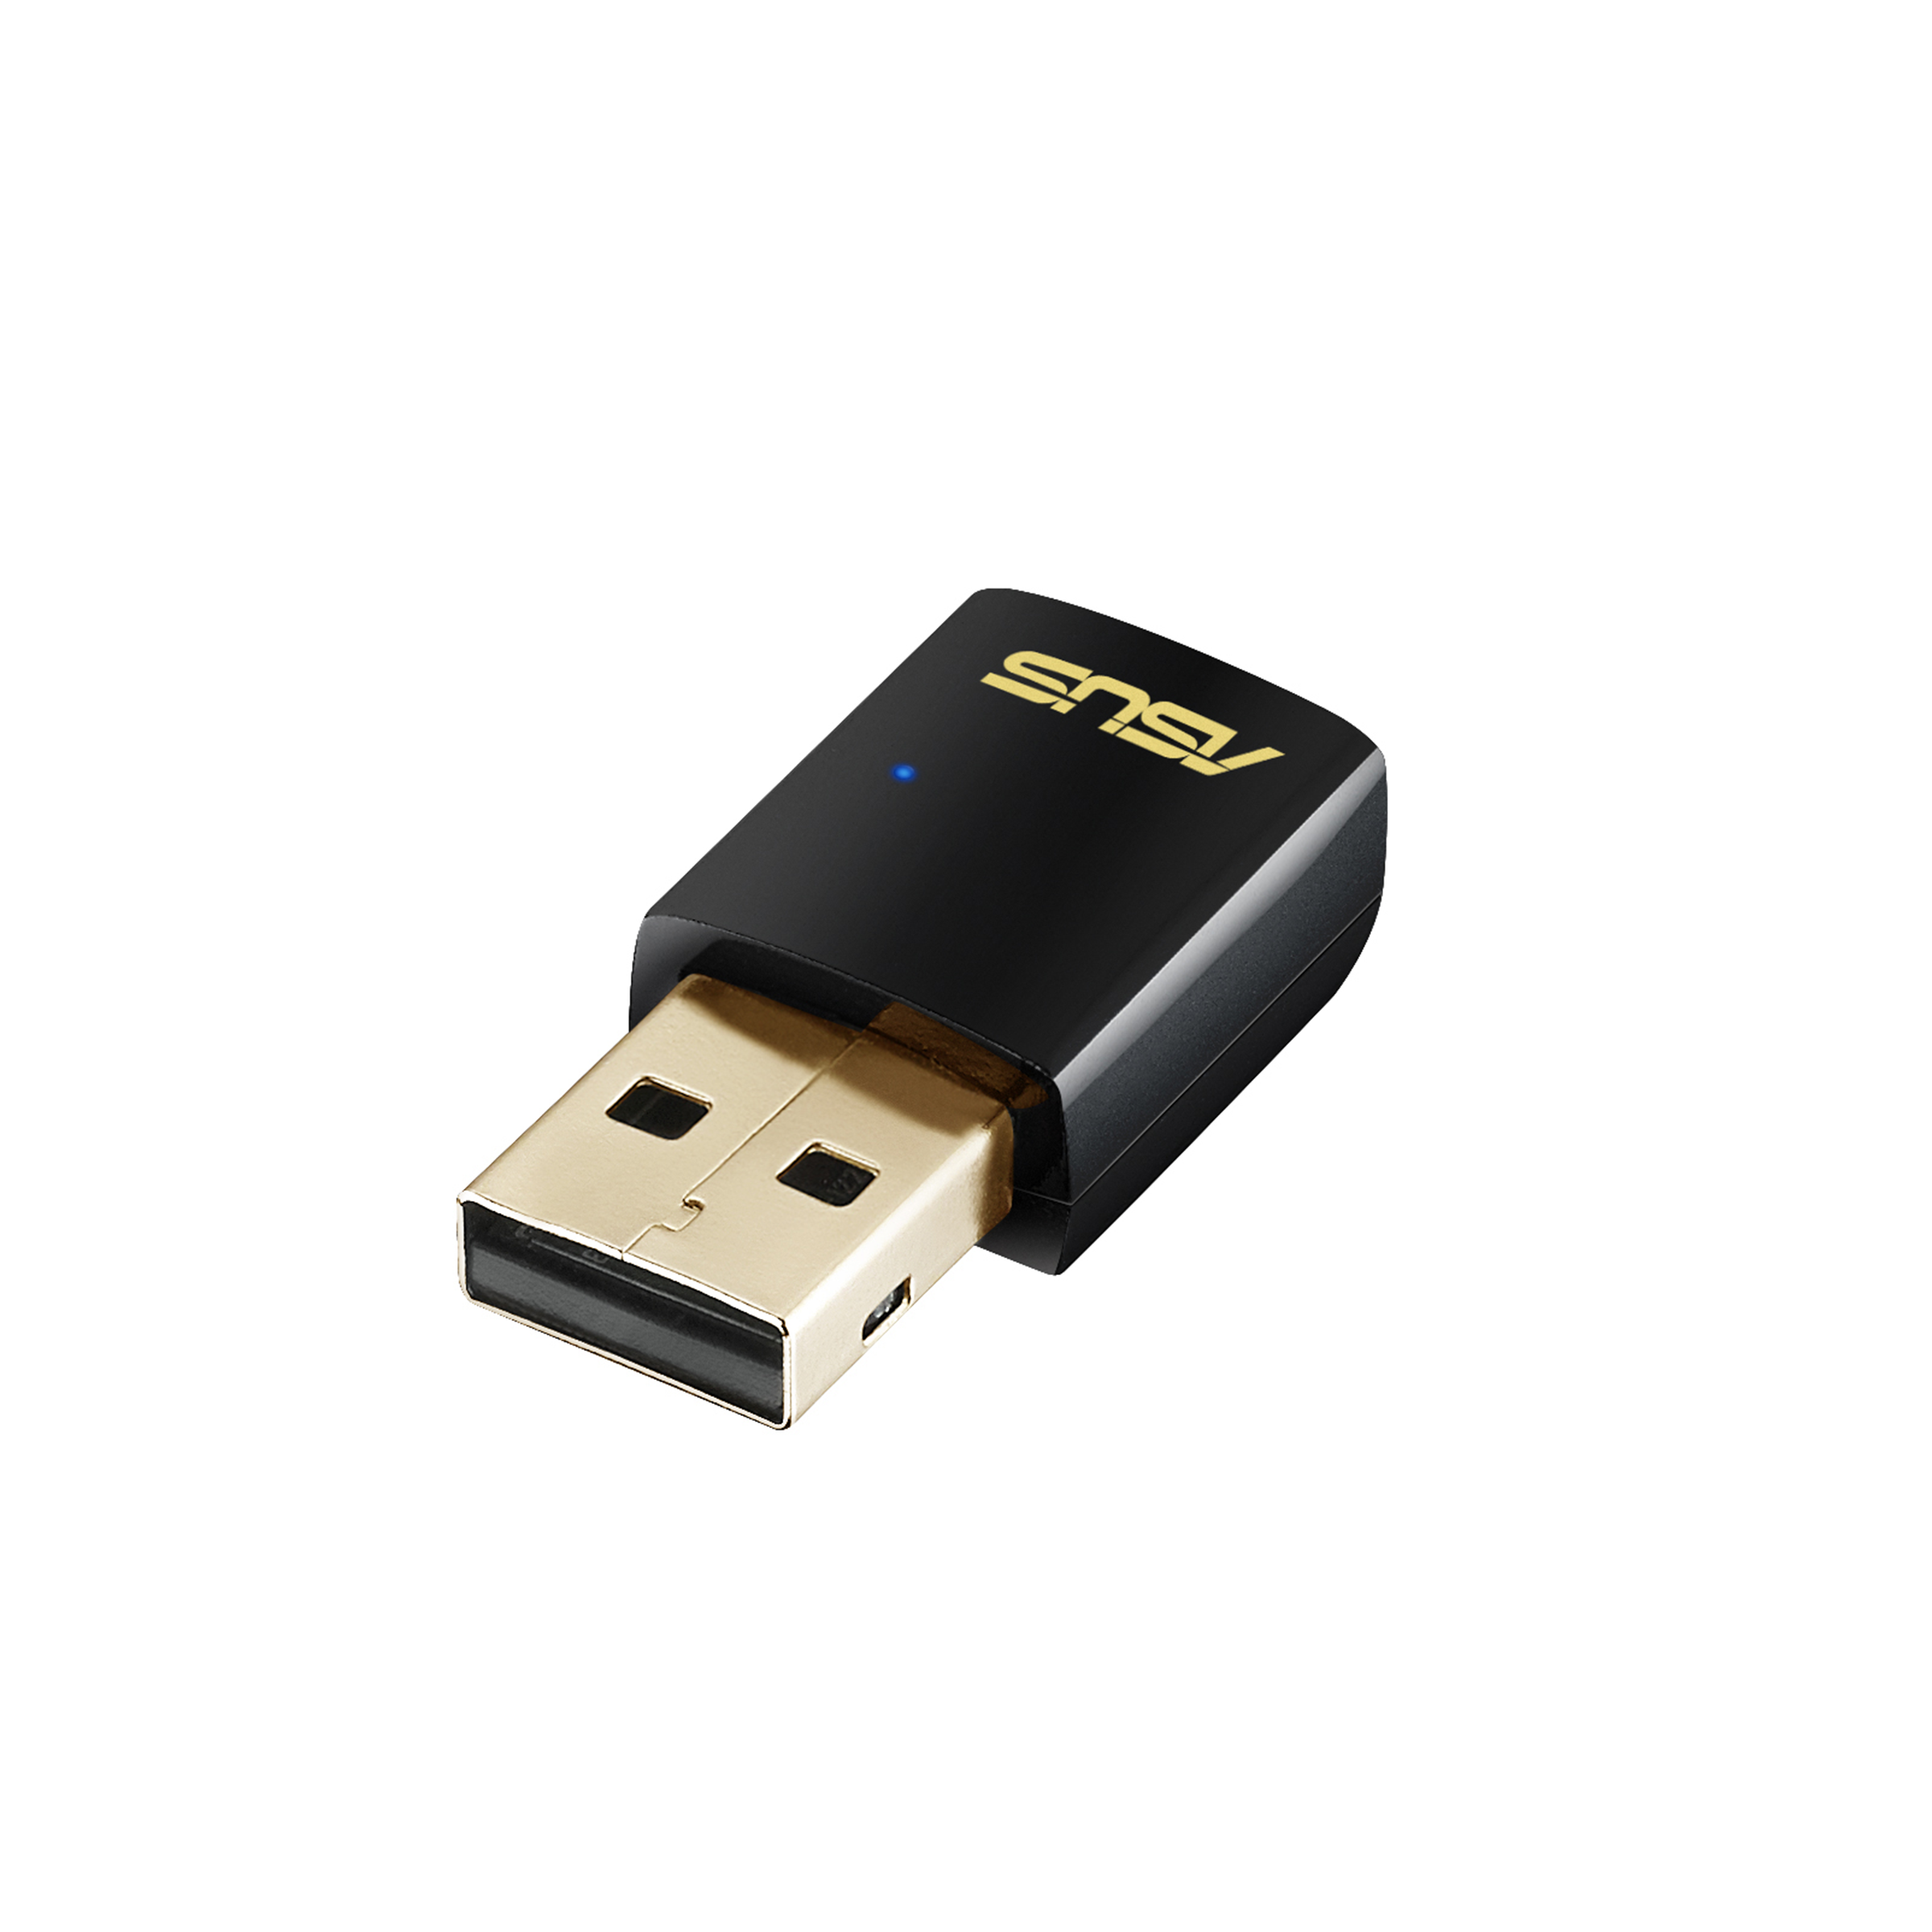 & Wired Adapters｜ASUS United Kingdom